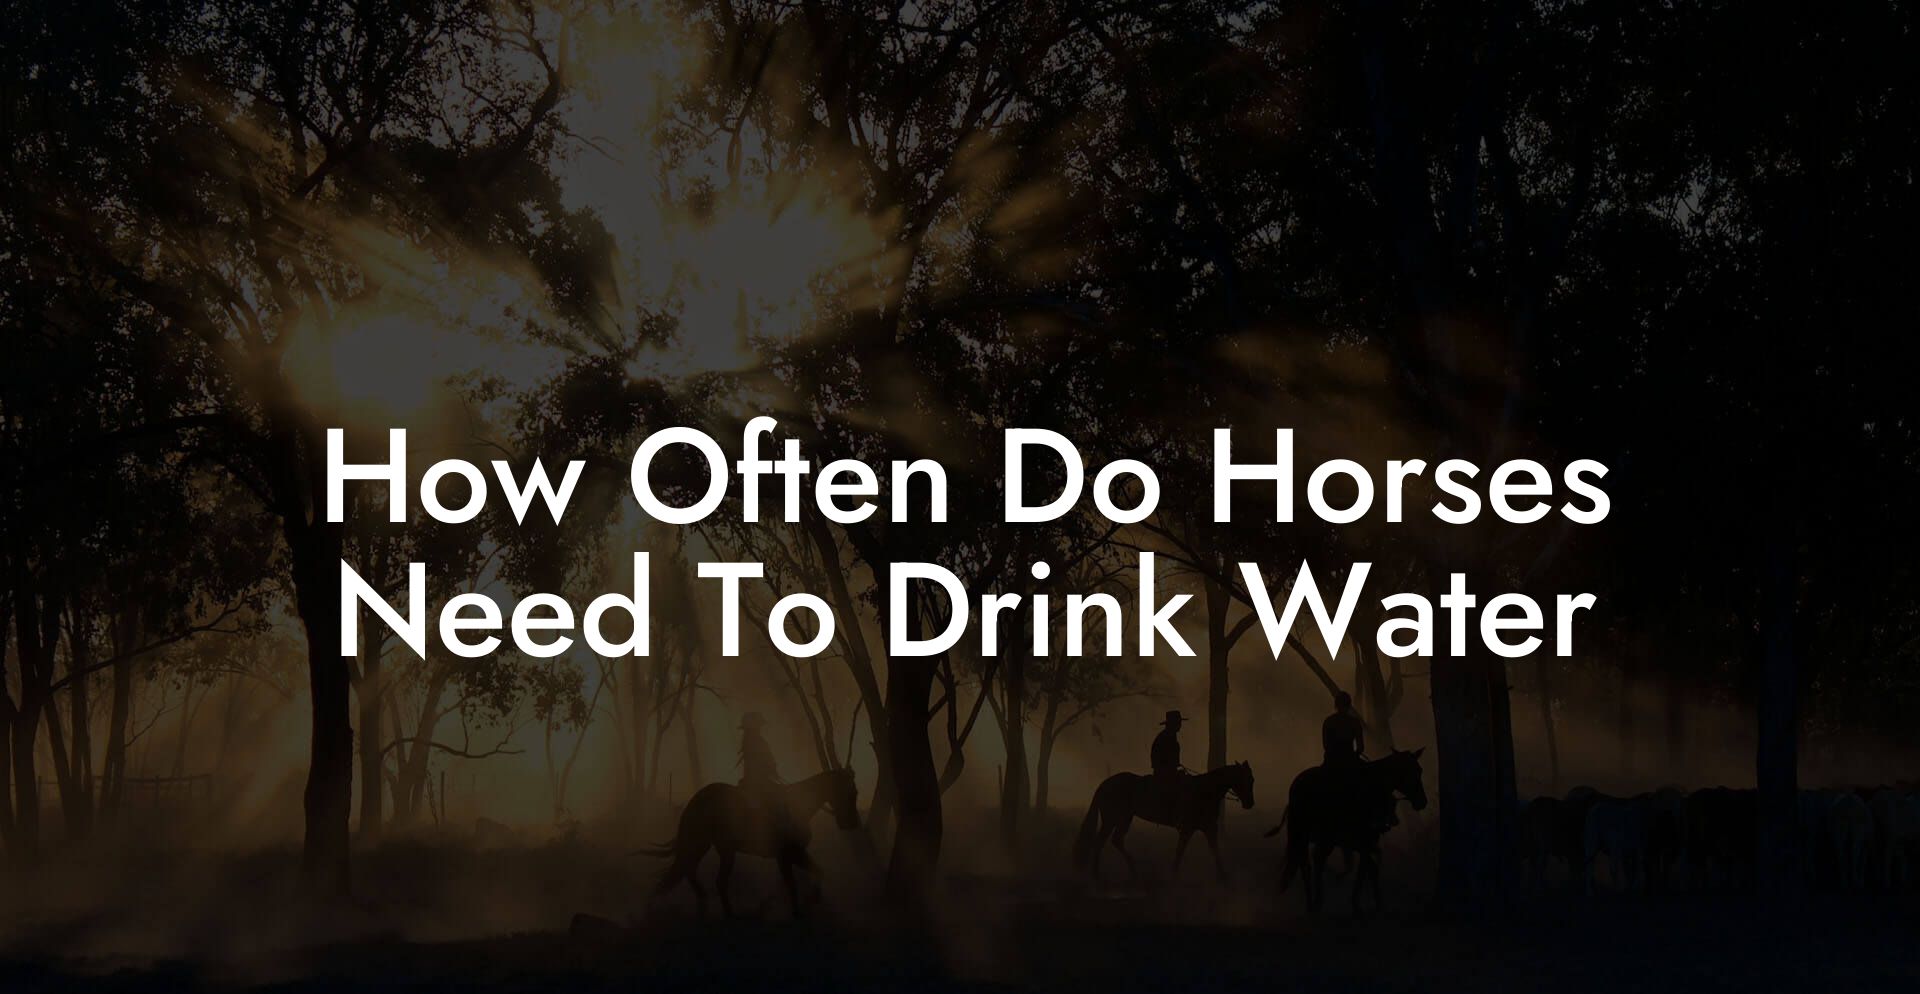 How Often Do Horses Need To Drink Water